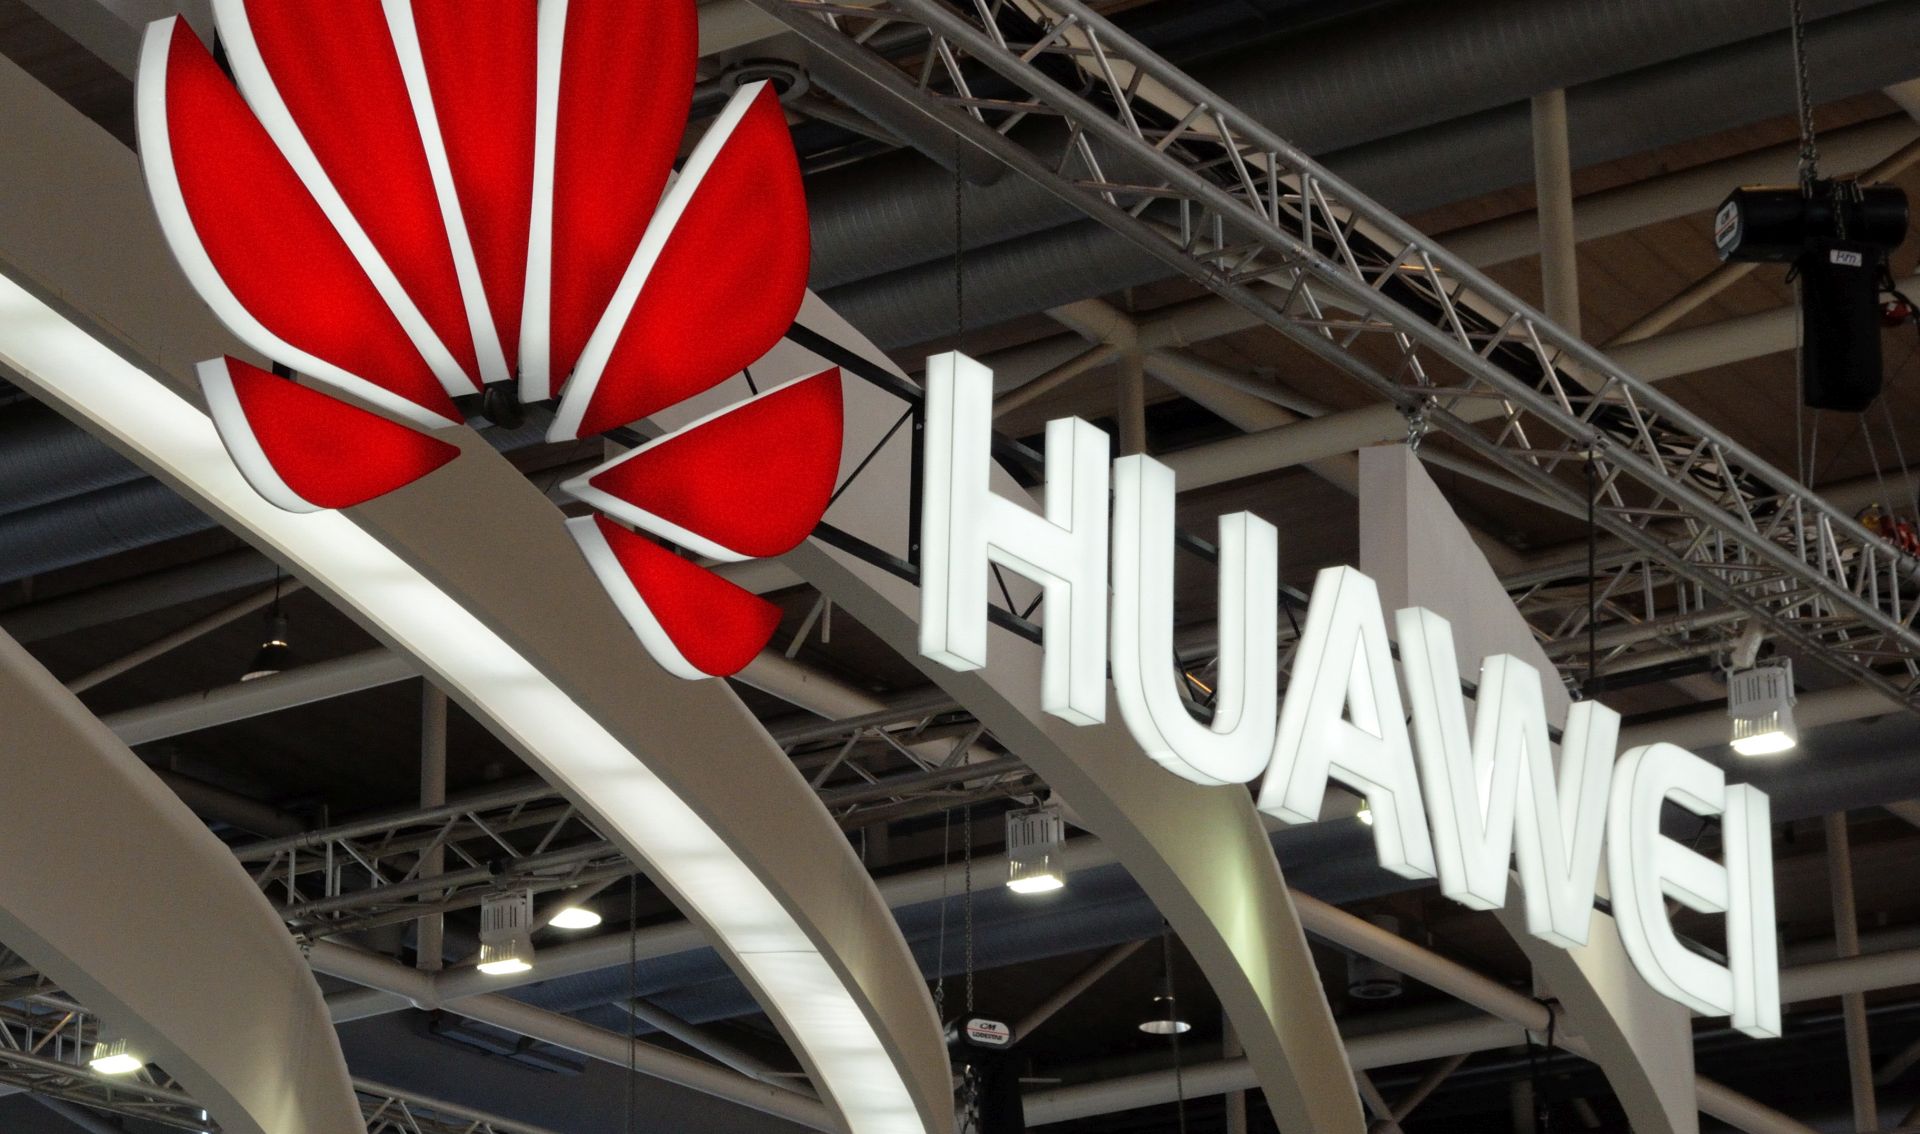 epa07574132 (FILE) - An image of the company logo of the Chinese IT company and service provider Huawei, at the CeBit trade fair in Hanover, 06 March 2012 (reissued 16 May 2019). According to media reports on 16 May 2019, the US Commerce Department added Huawei Technologies Co Ltd. to the Bureau of Industry and Security (BIS) Entity List, which prohibits the company from obtaining technology from US firms without explicit government approval. The decision was made on national security grounds, as US has accused Huawei, a Chinese telecommunications firm, of potentially conducting espionage on behalf of the Chinese government with the implementation of its 5G network.  EPA/MAURITZ ANTIN